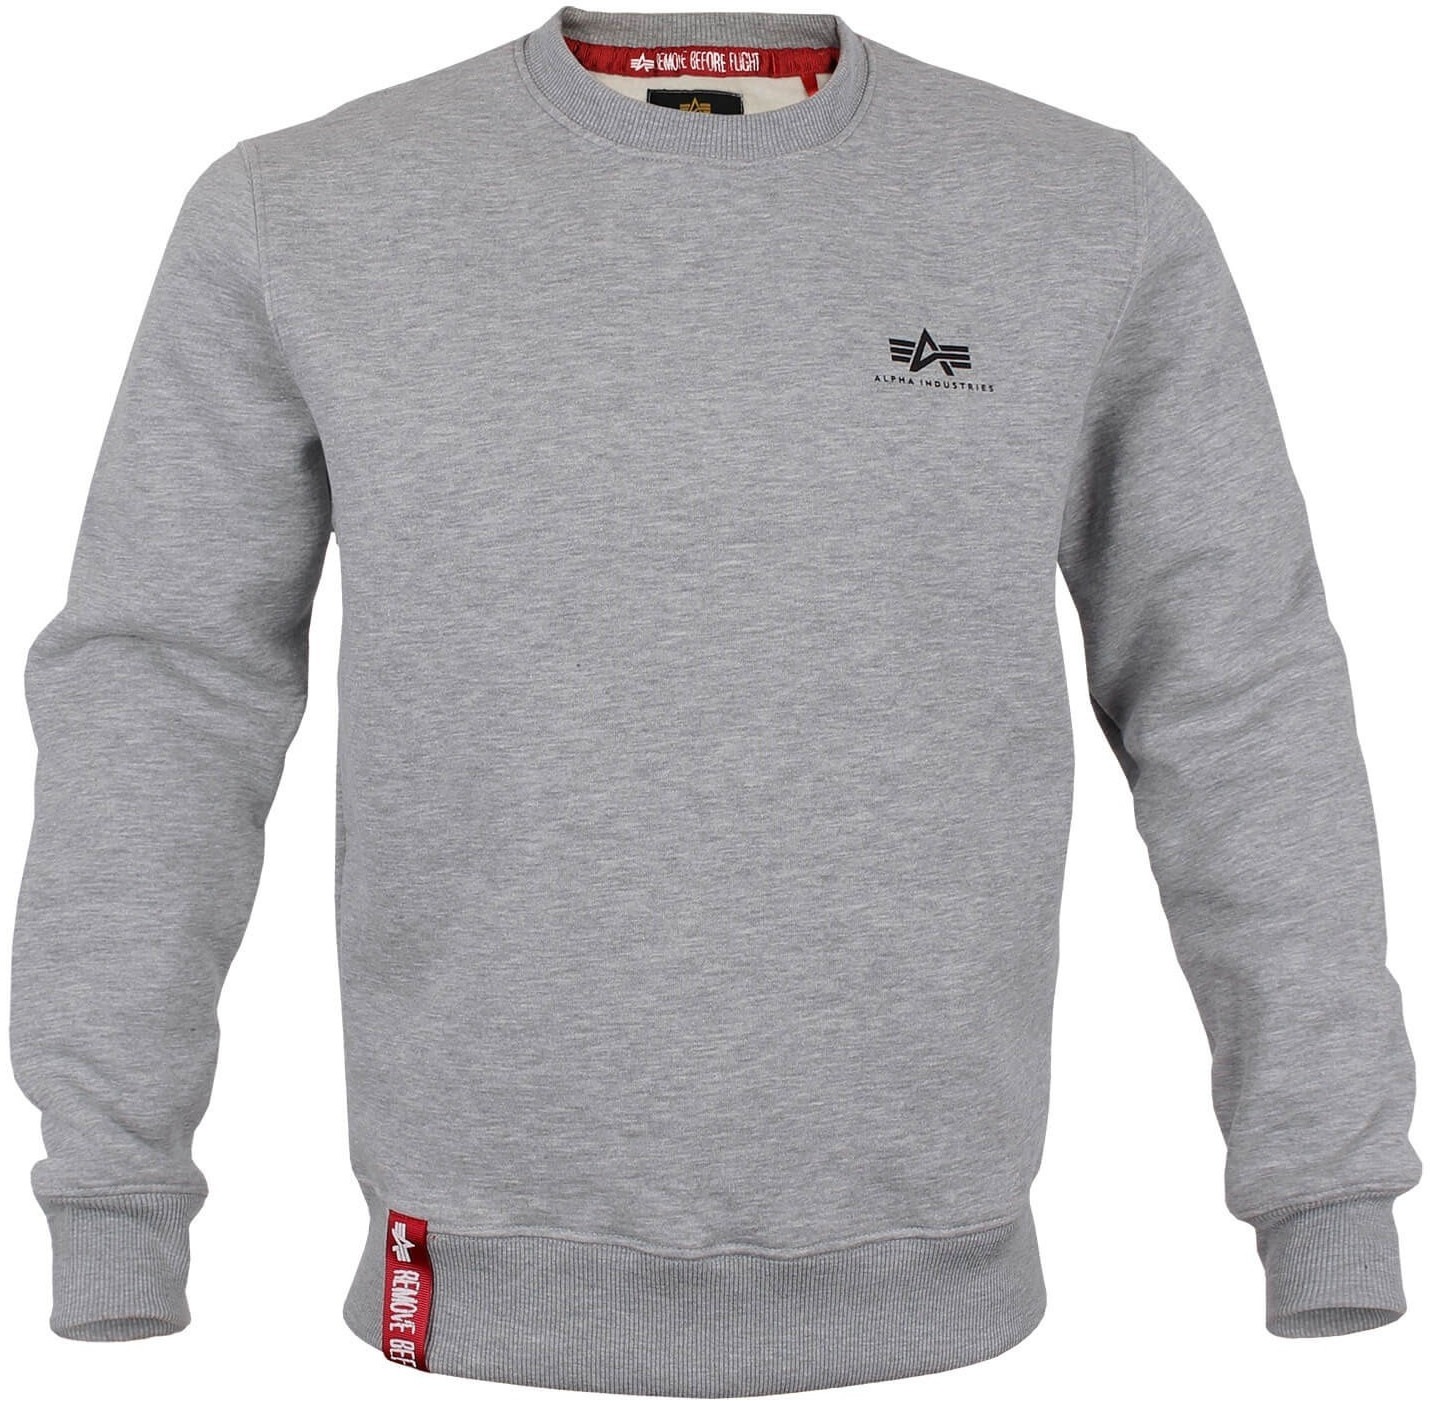 The Logo - Basic 515 Sweater - Industries Heather Small (188307/17) Grey Alpha